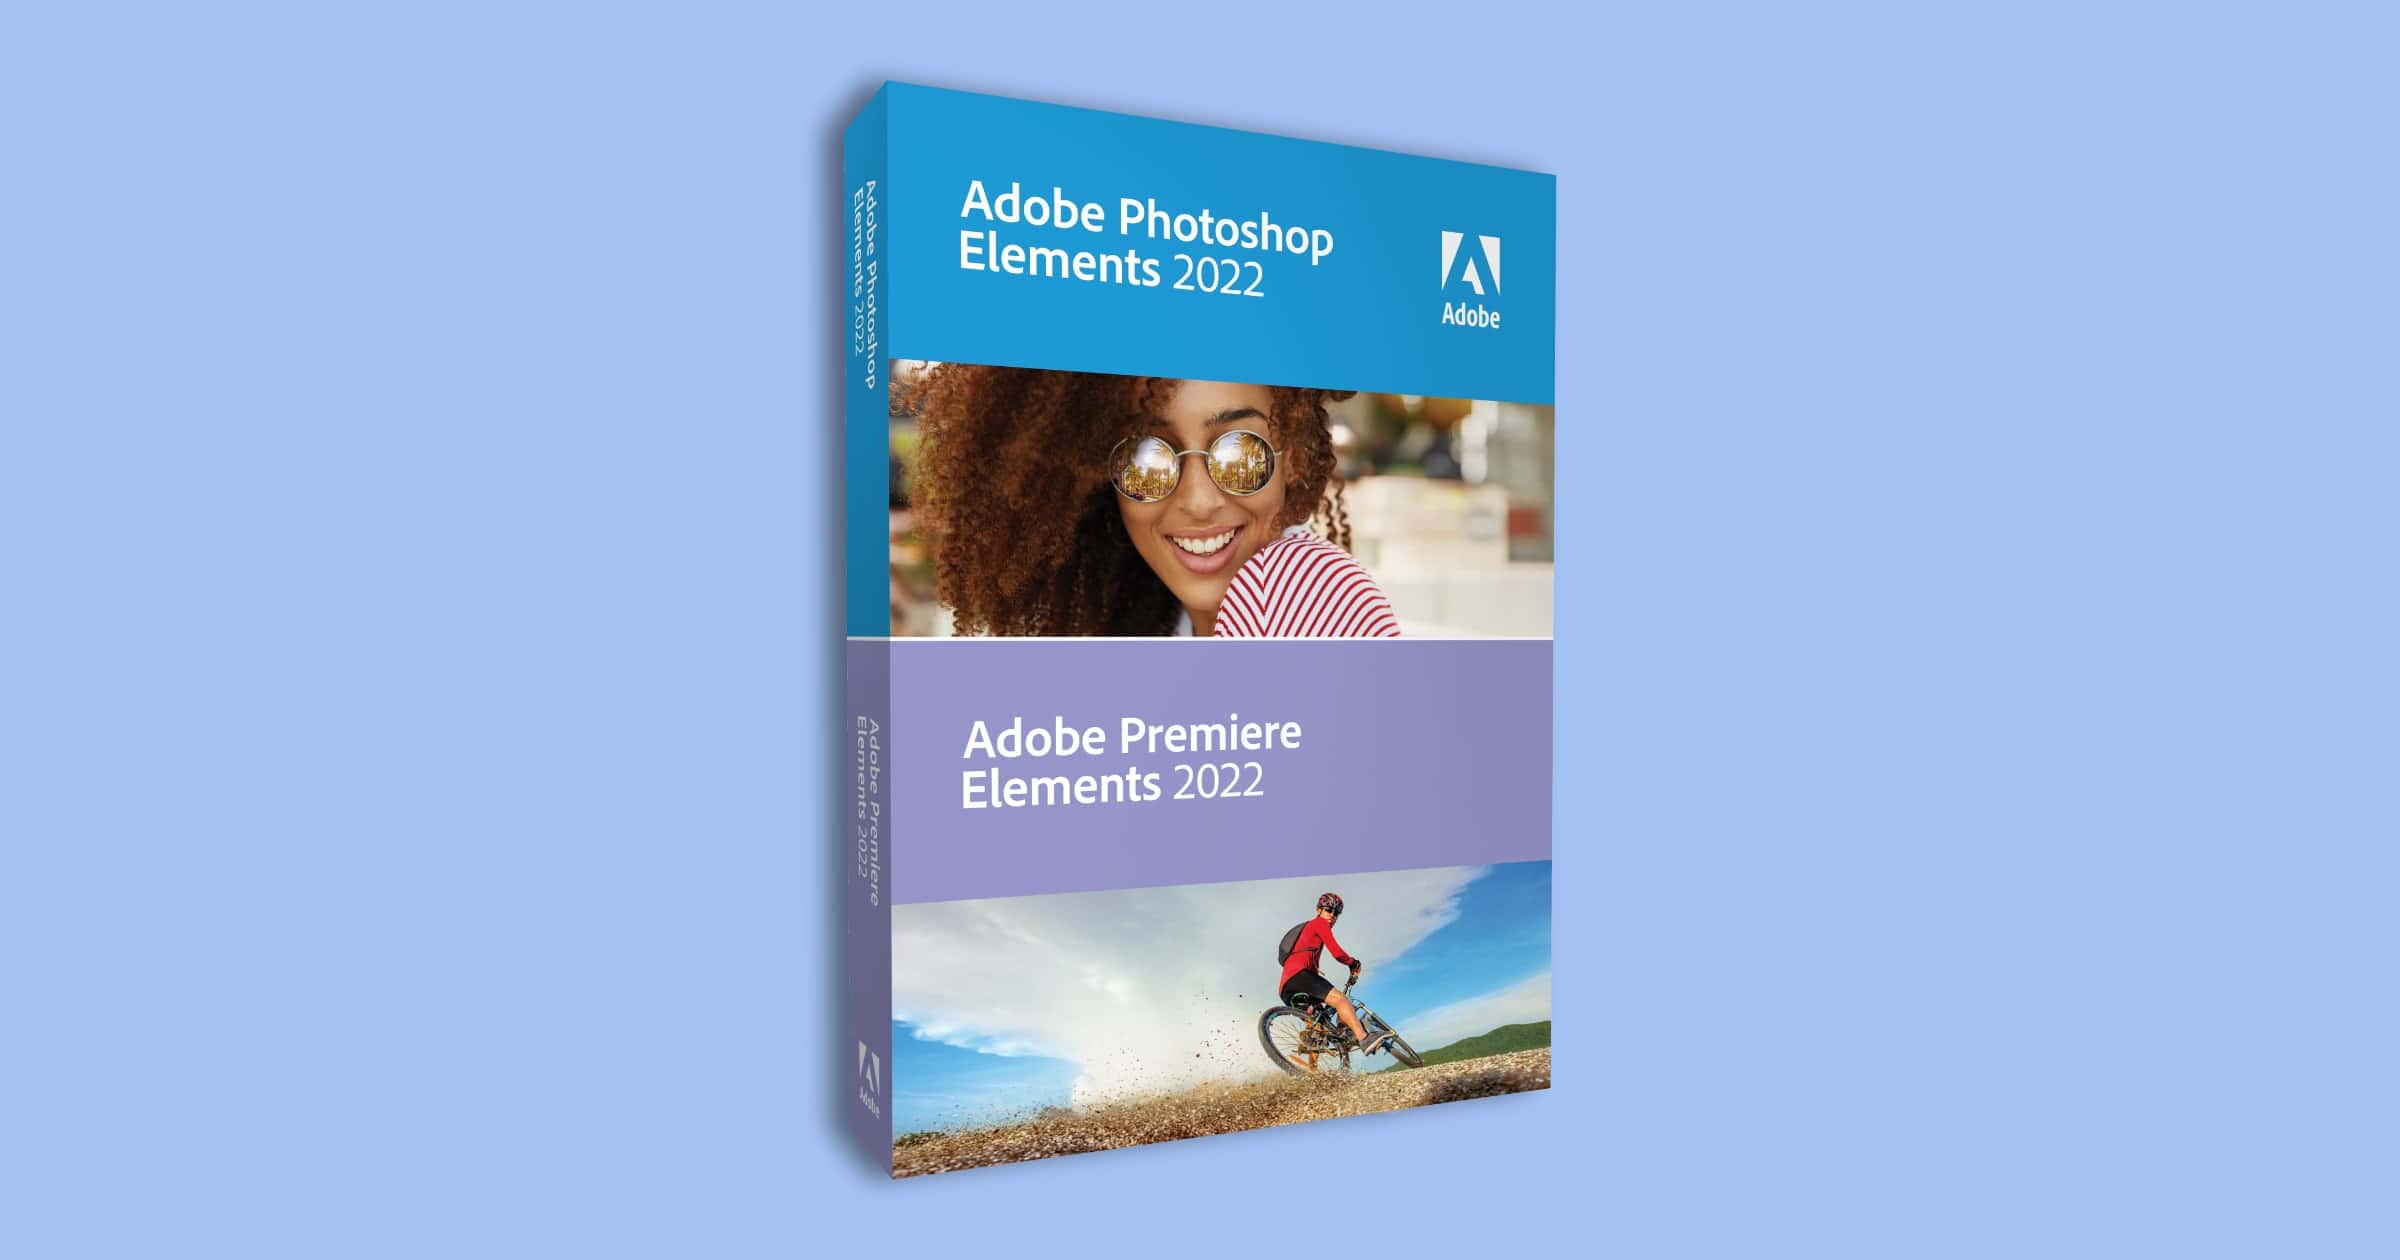 Adobe Releases Photoshop Elements 2022 and Premiere Elements 2022